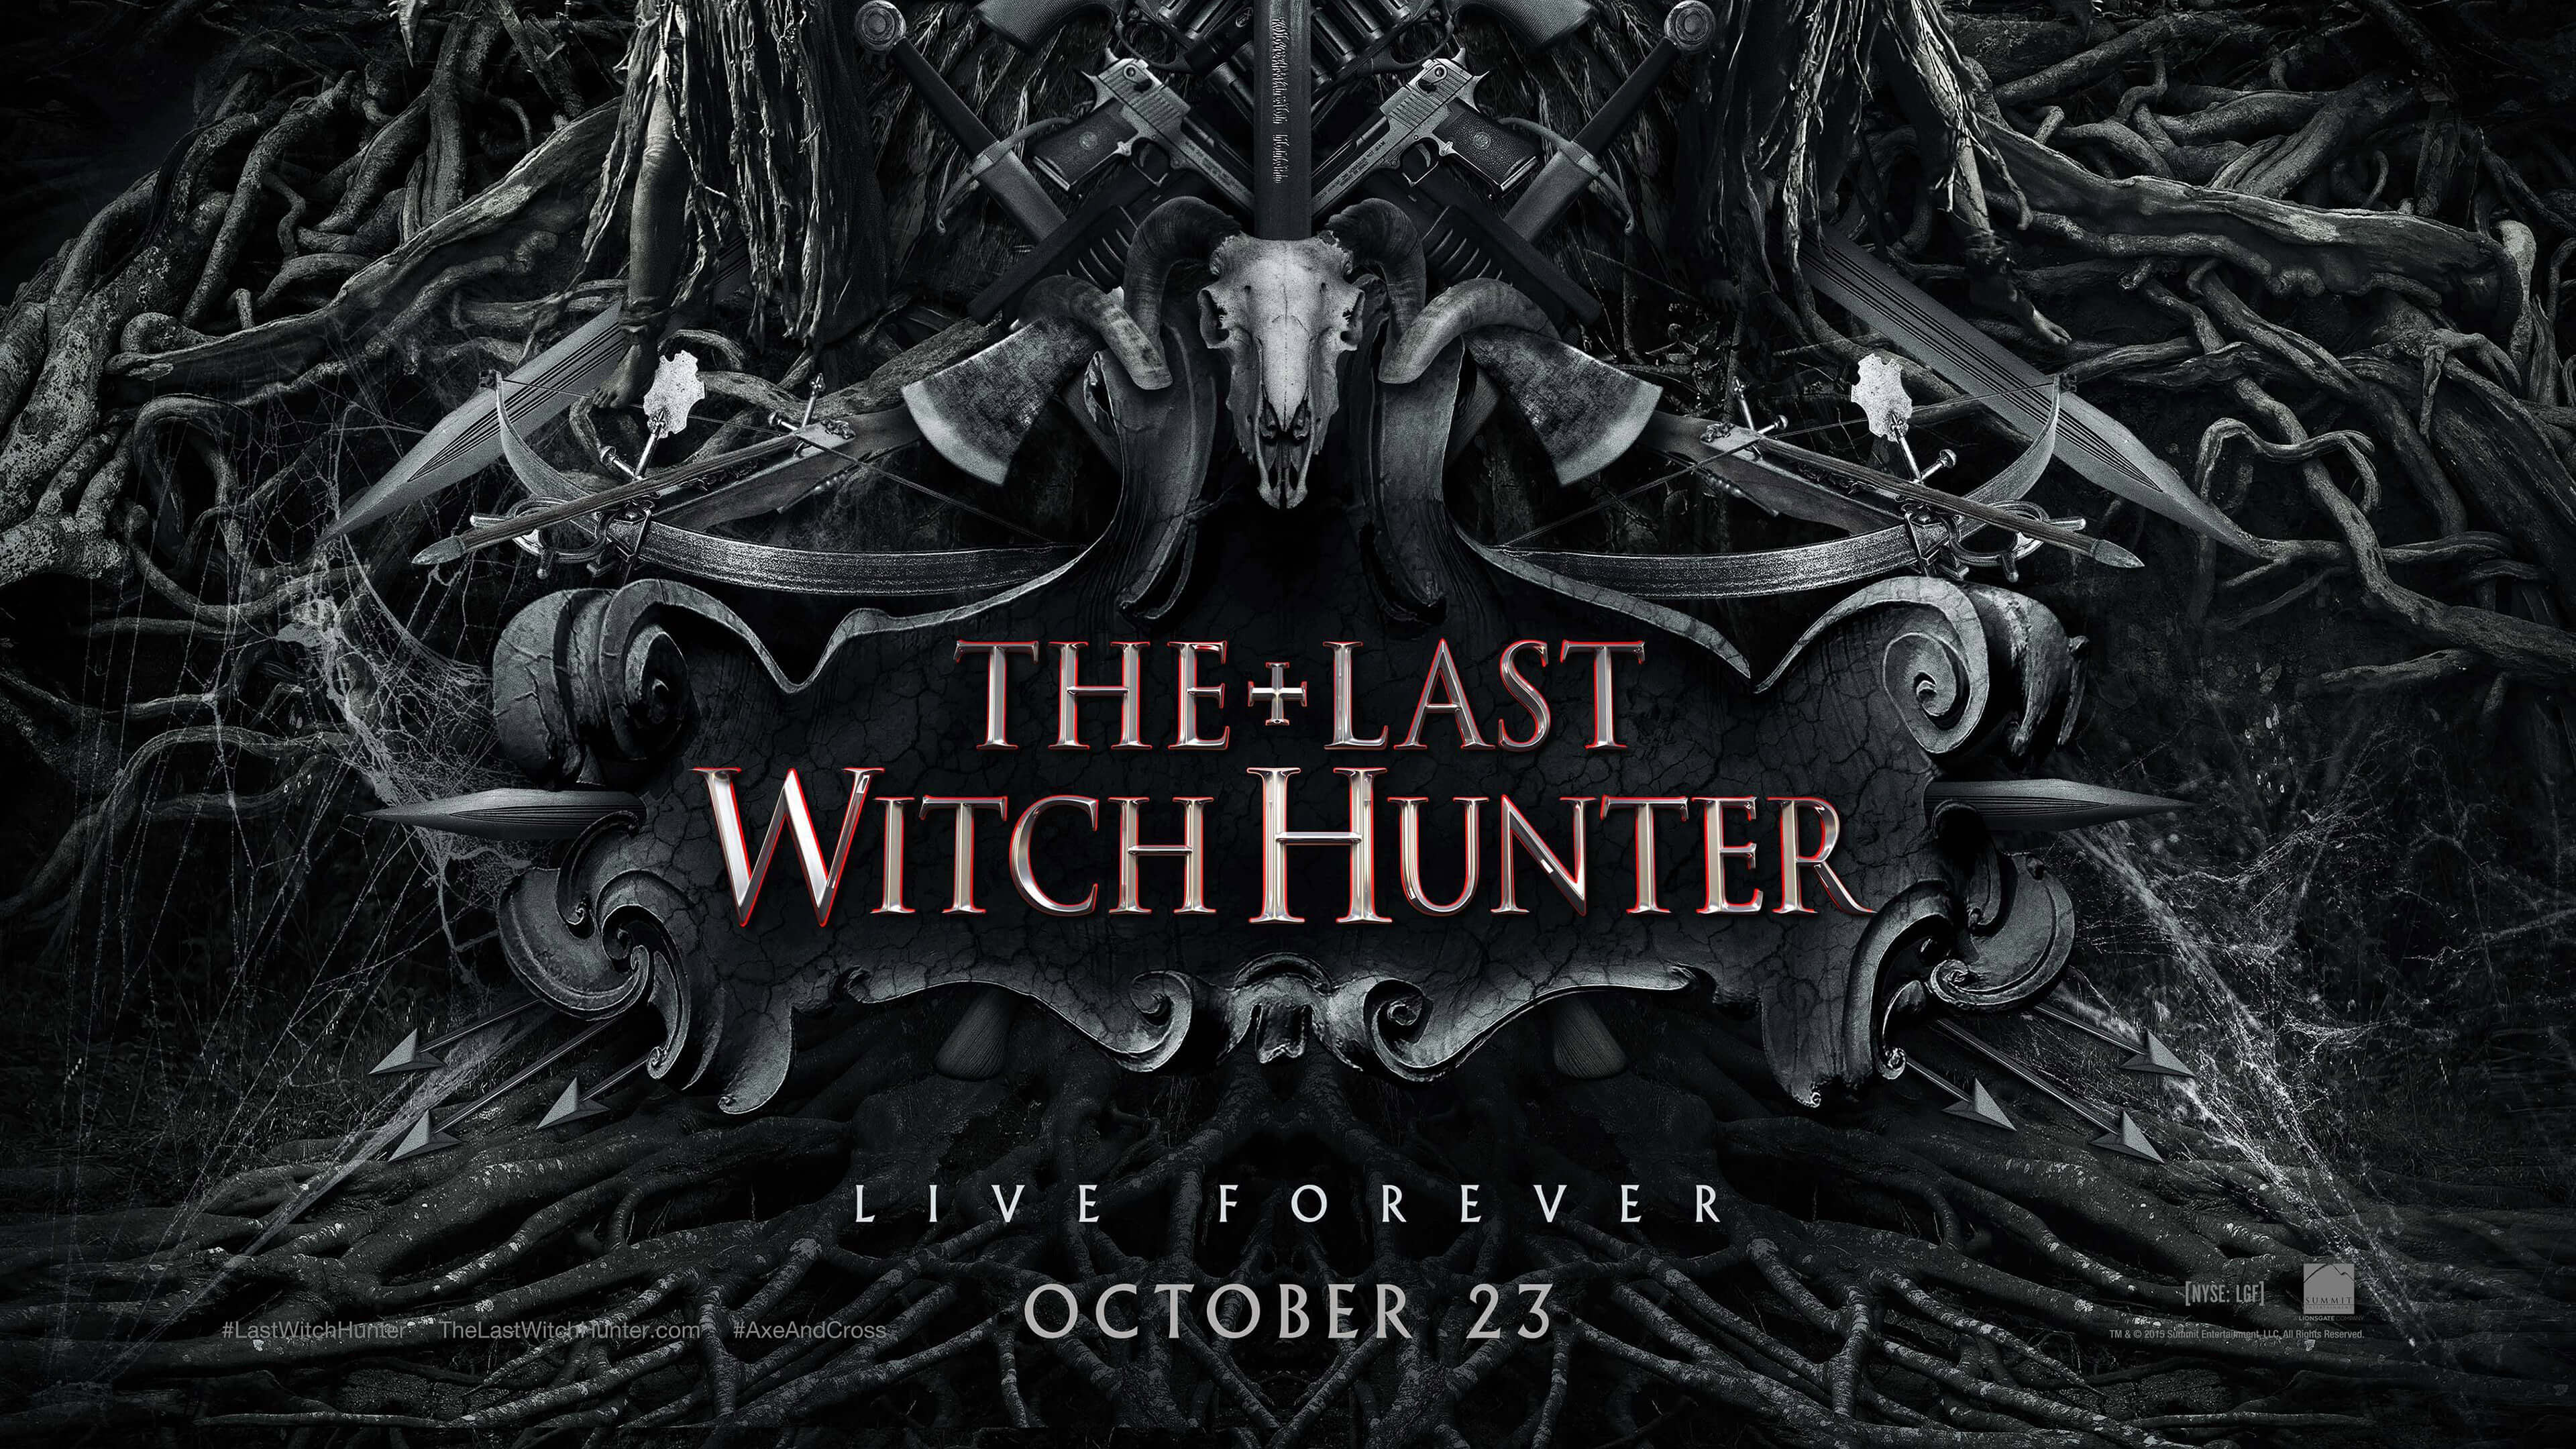 The Last Witch Hunter 2015 Movie Poster 4K Wallpaper